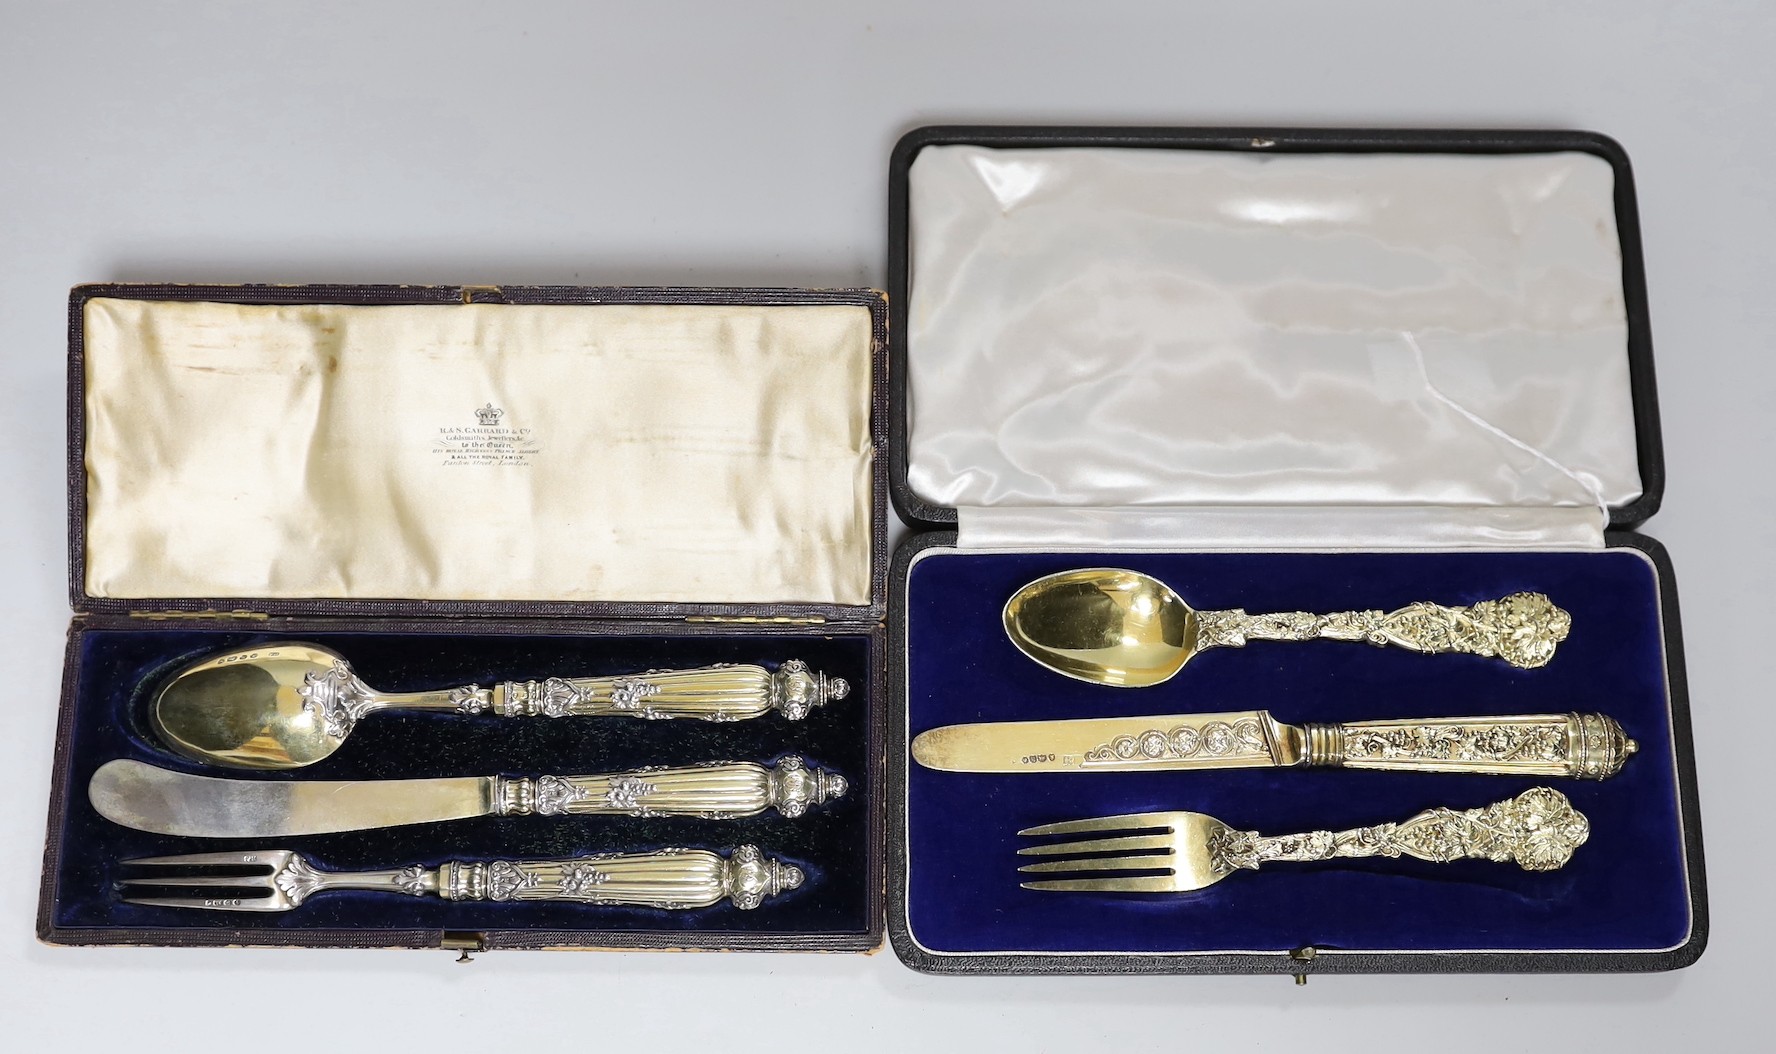 A cased George IV silver gilt christening trio (spoon, knife and fork) by Ely & Fearn, London, 1823 and one other cased Victorian parcel silver gilt trio, Francis Higgins, London, 1848/9.                                 